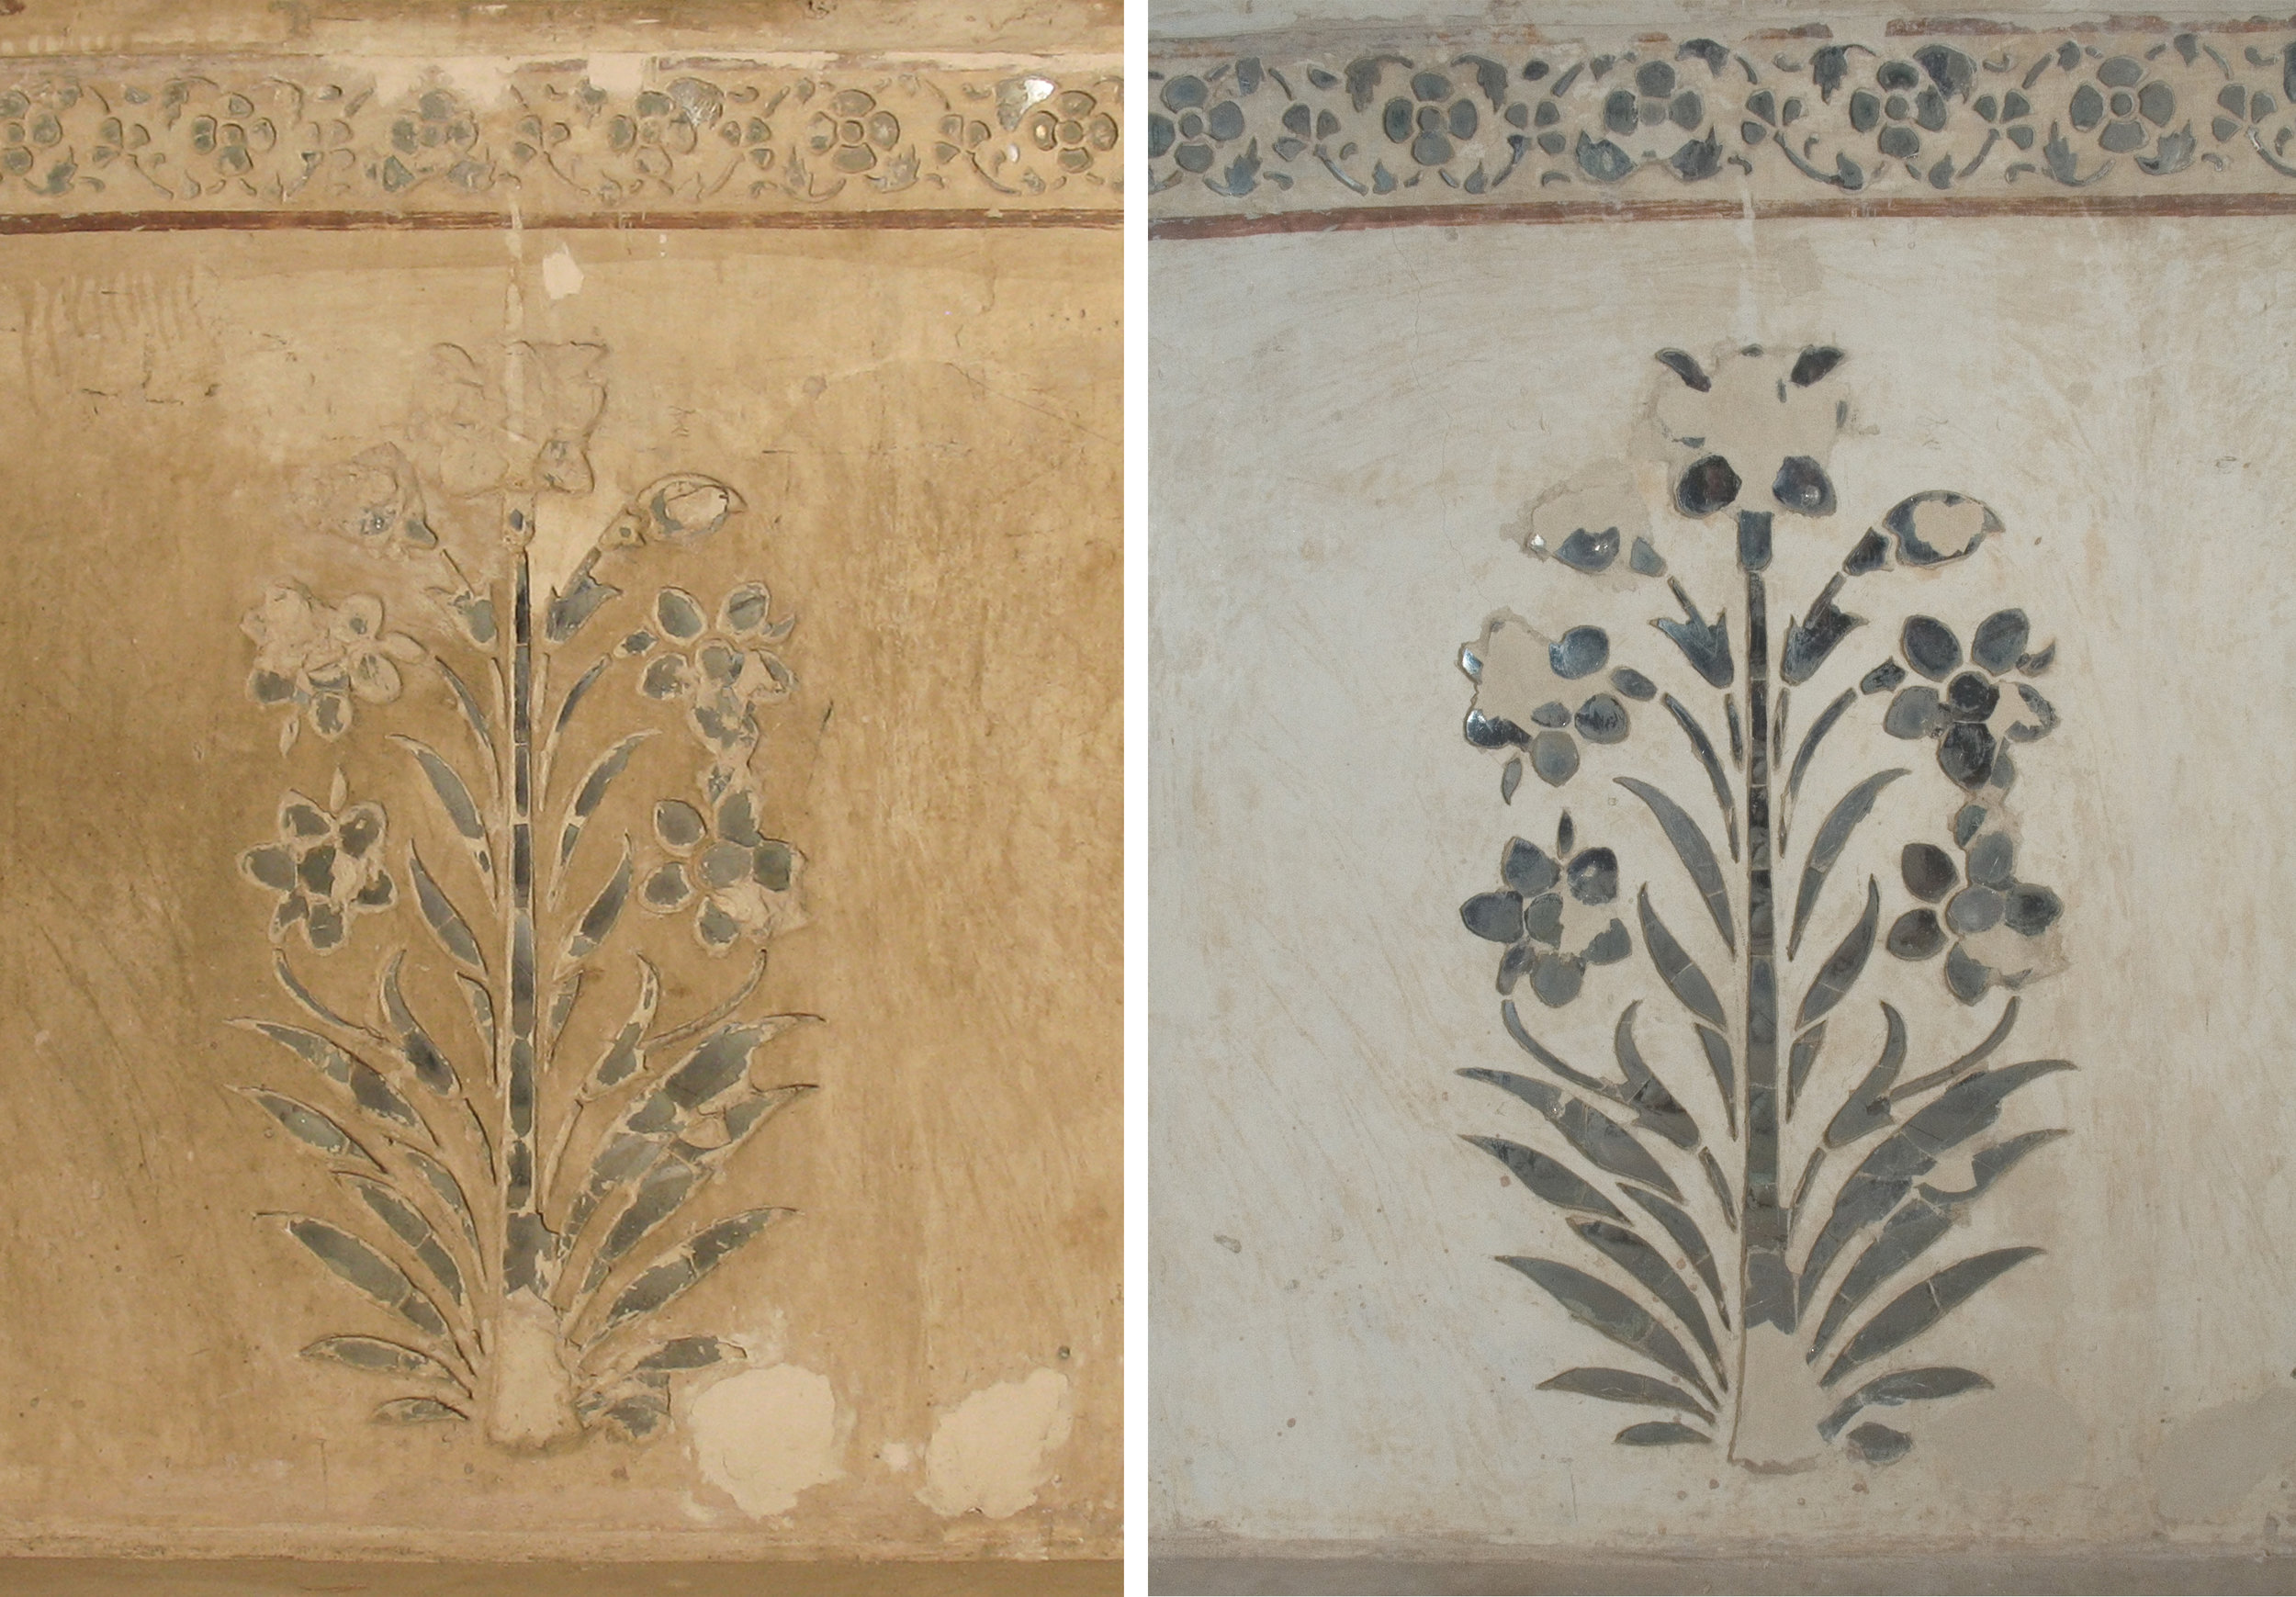  Detail of the mirrored dado level before (left) and after (right) cleaning.&nbsp;  Image © Courtauld CWPD 